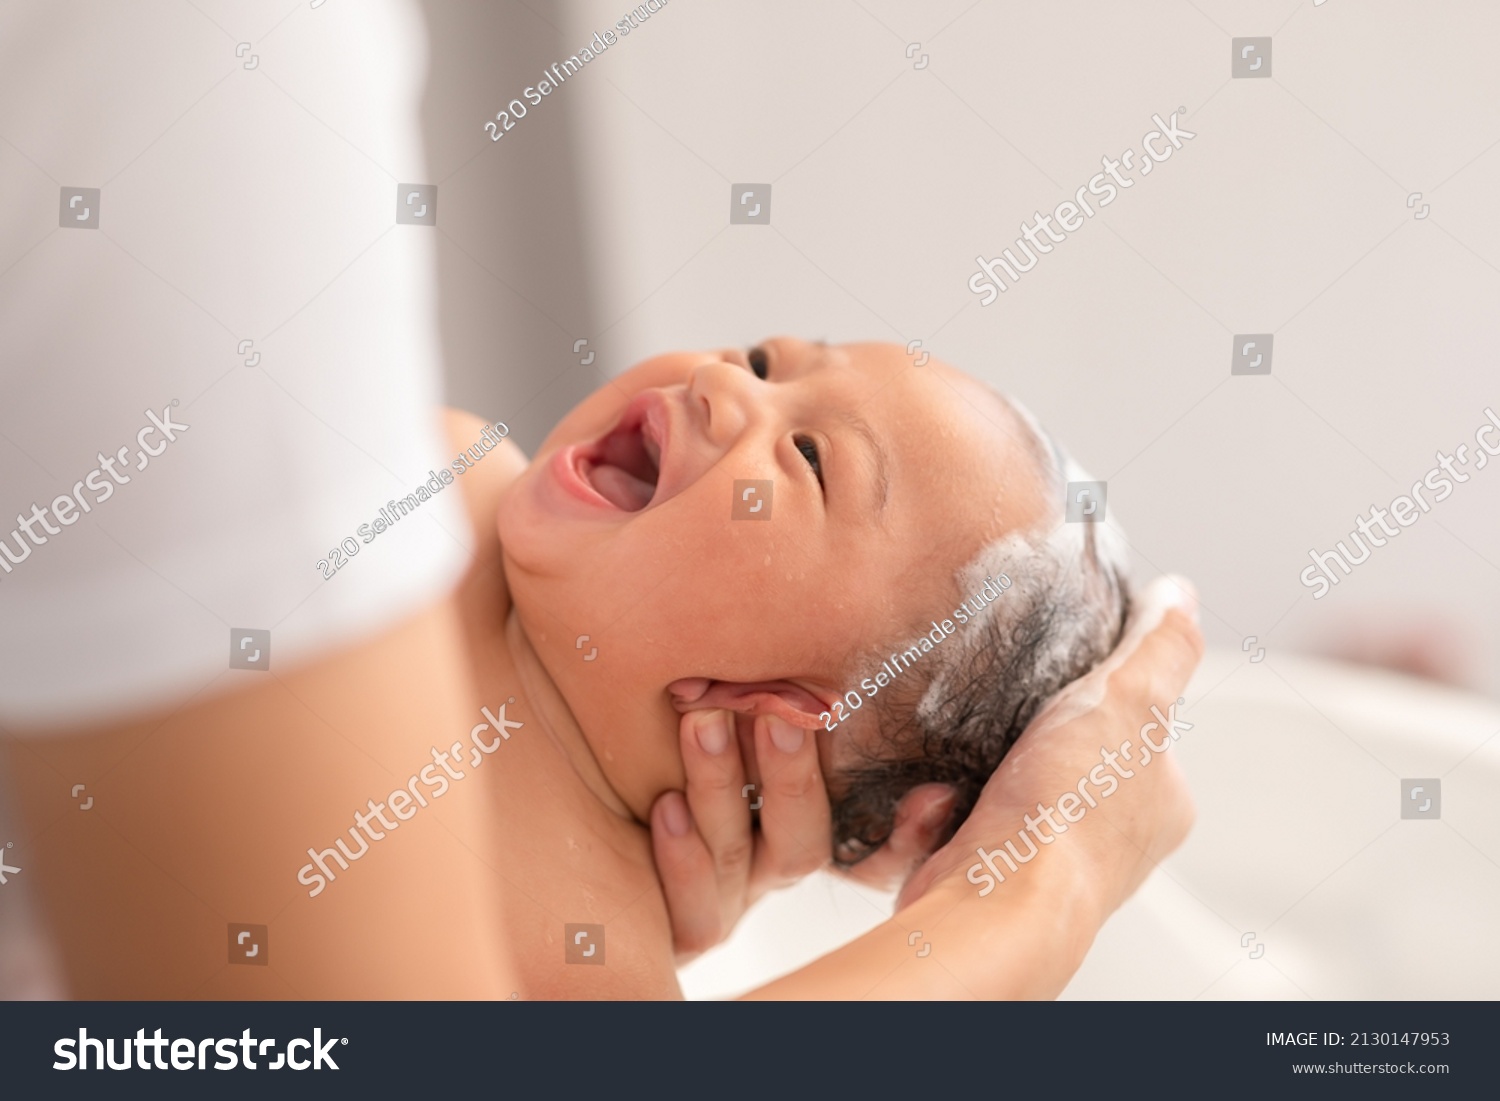 Close up asian newborn baby bathing in bathtub. mother bathing her son in warm water. Happy adorable newborn infant smile in tub relax and comfortable good moment with mom. Newborn baby care concept #2130147953